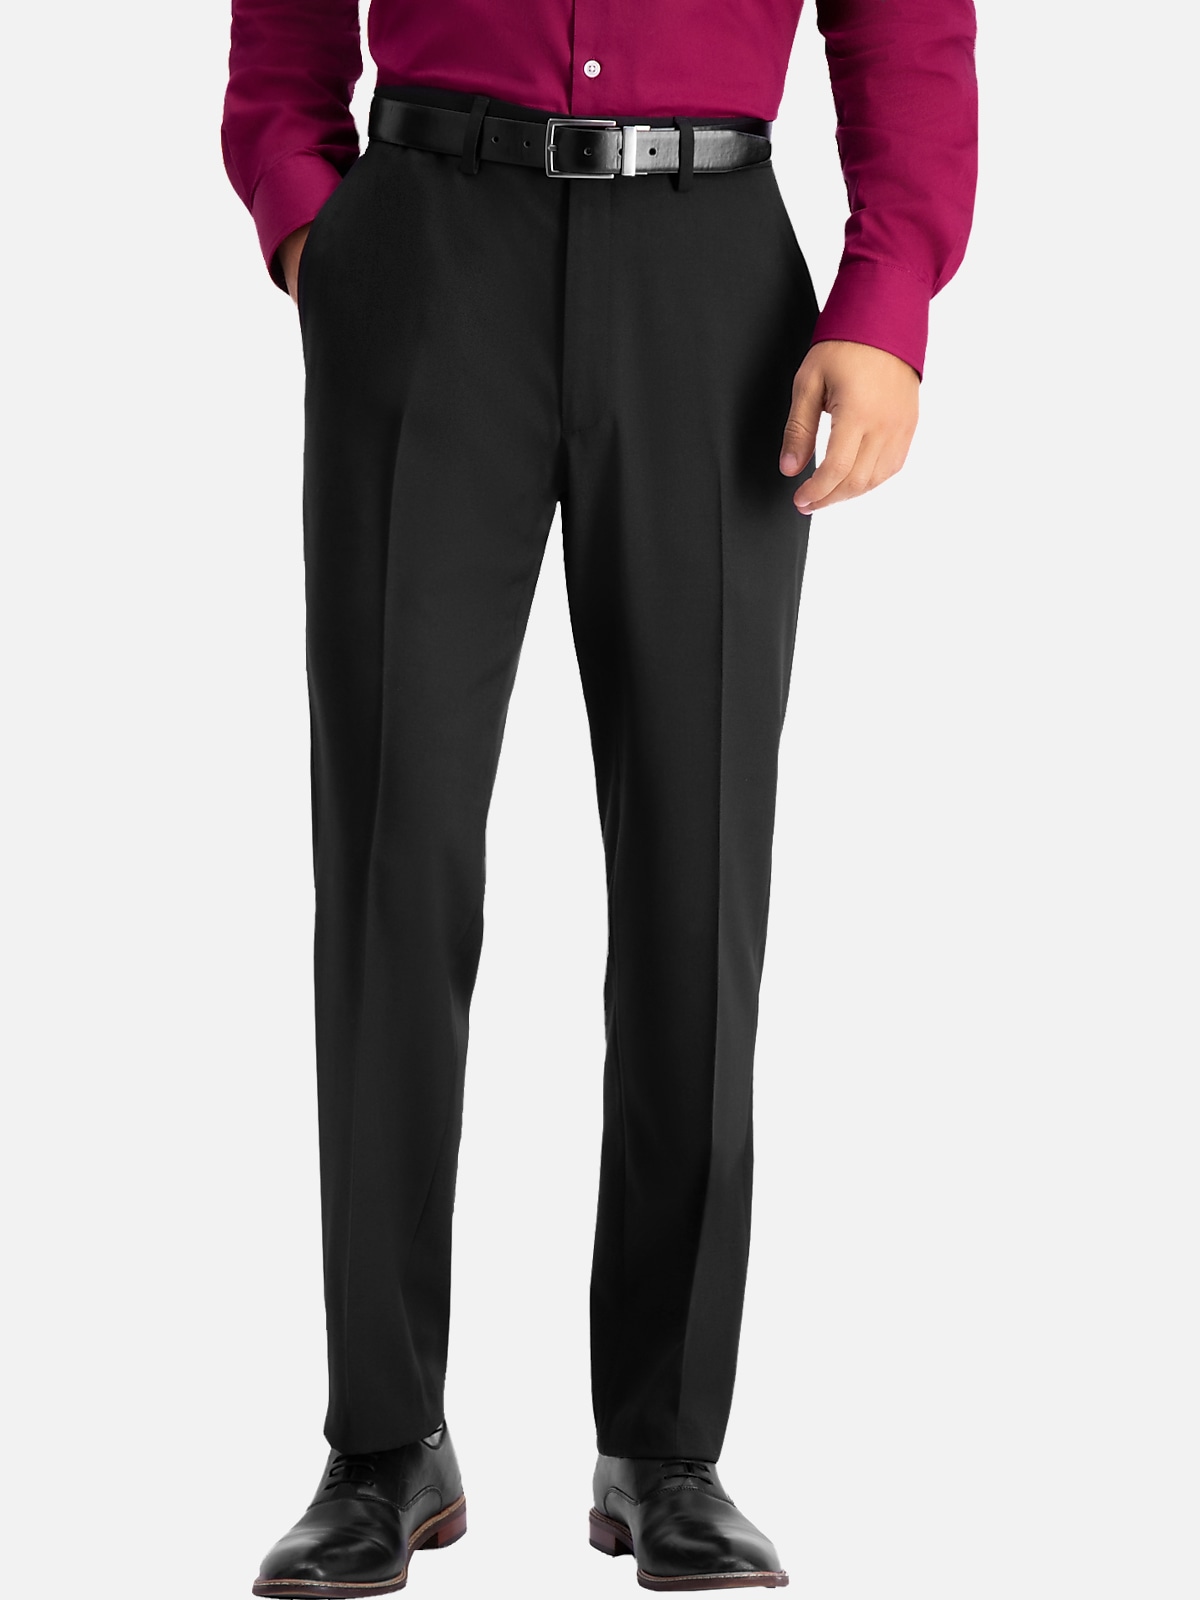 How To Take Your Classic Black Pant Suit From Drab to FAB Story